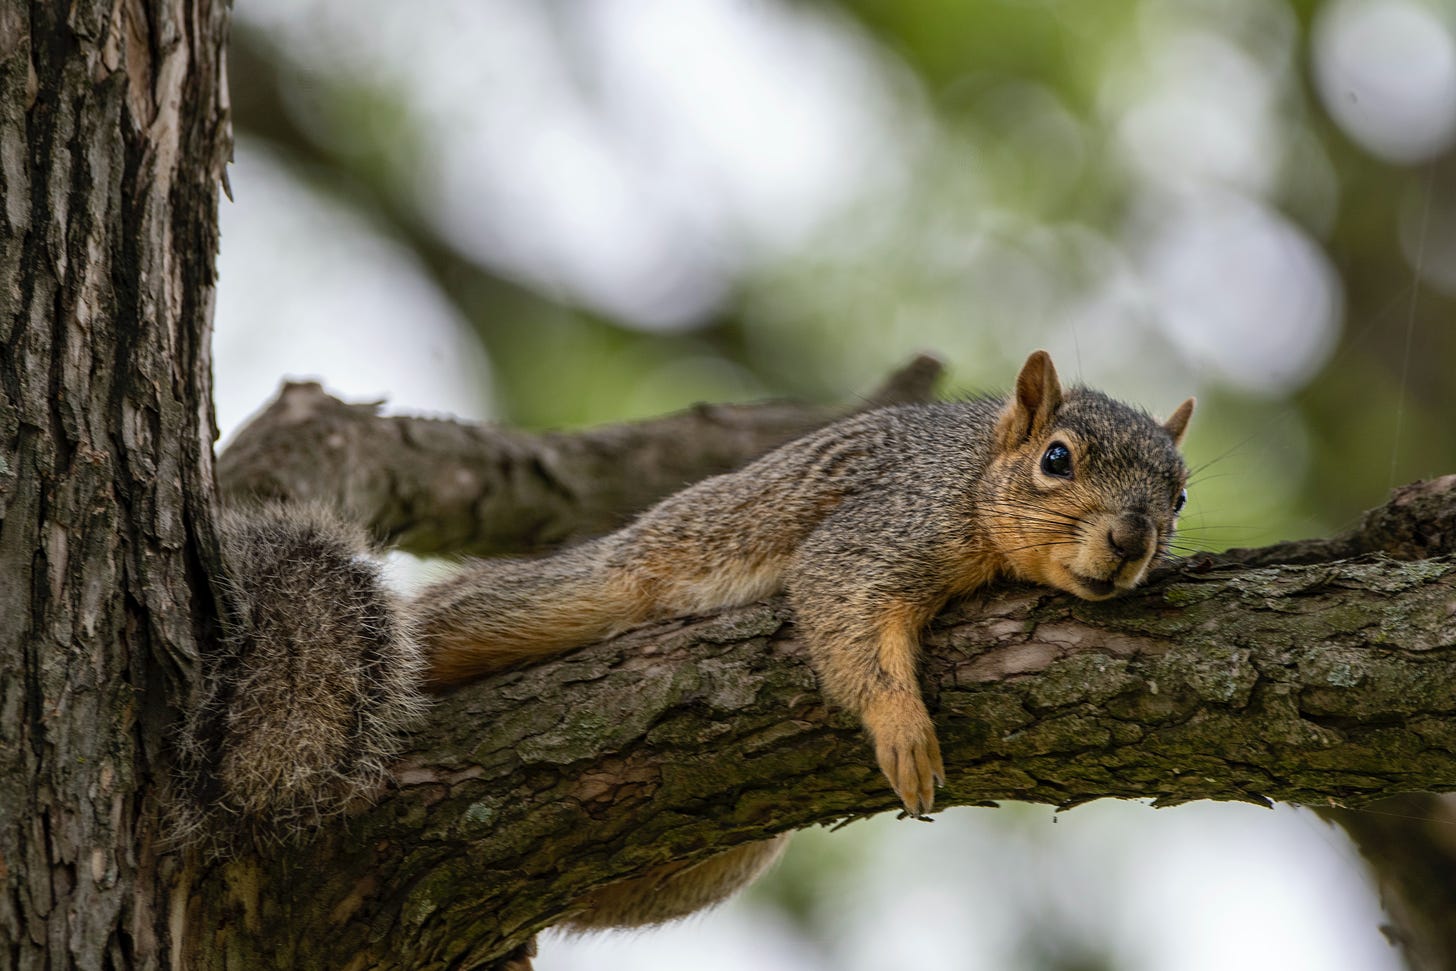 A squirrel either splooting or in squoaf mode on a tree branch, its cute little foreleg wrapped around the branch